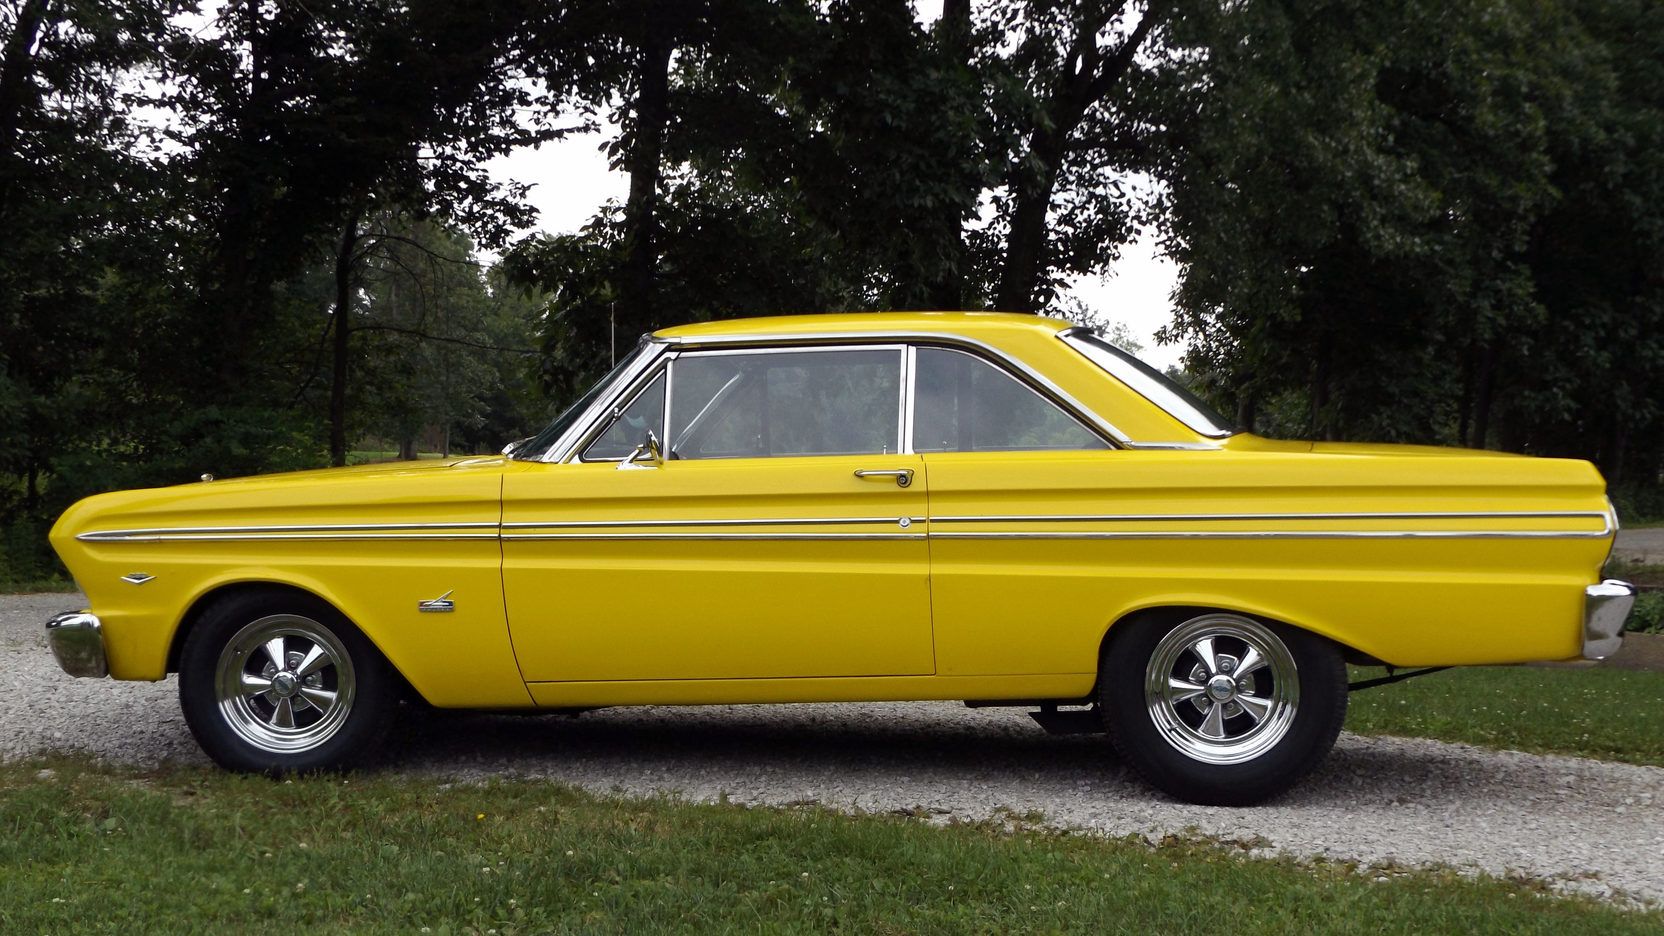 1965 Ford Falcon Sprint parked outside